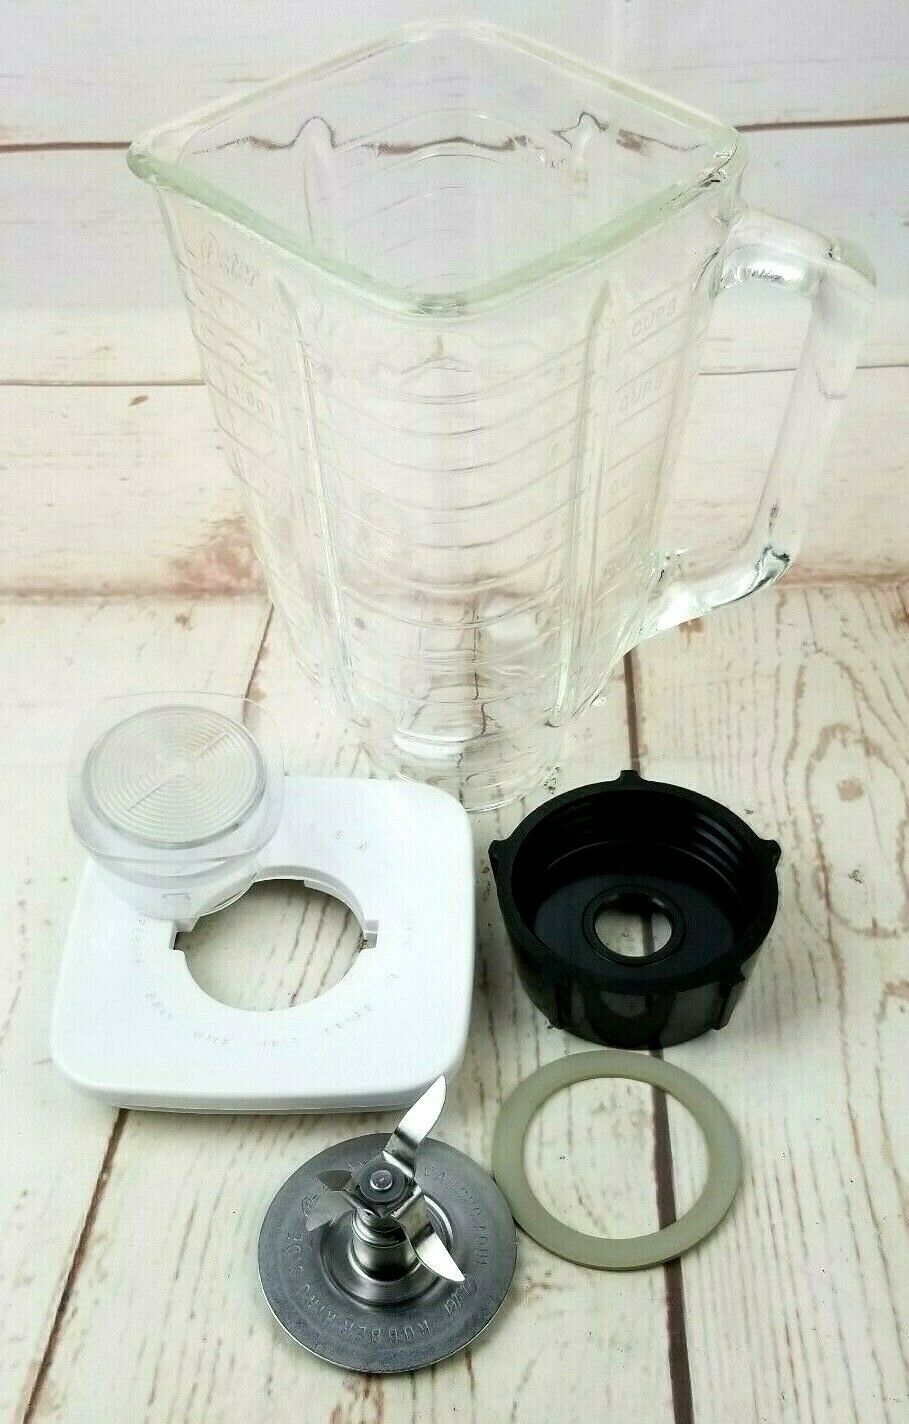 Oster 6 Cup Glass Blender Jar and Lid Replacement for Models: Blstaj